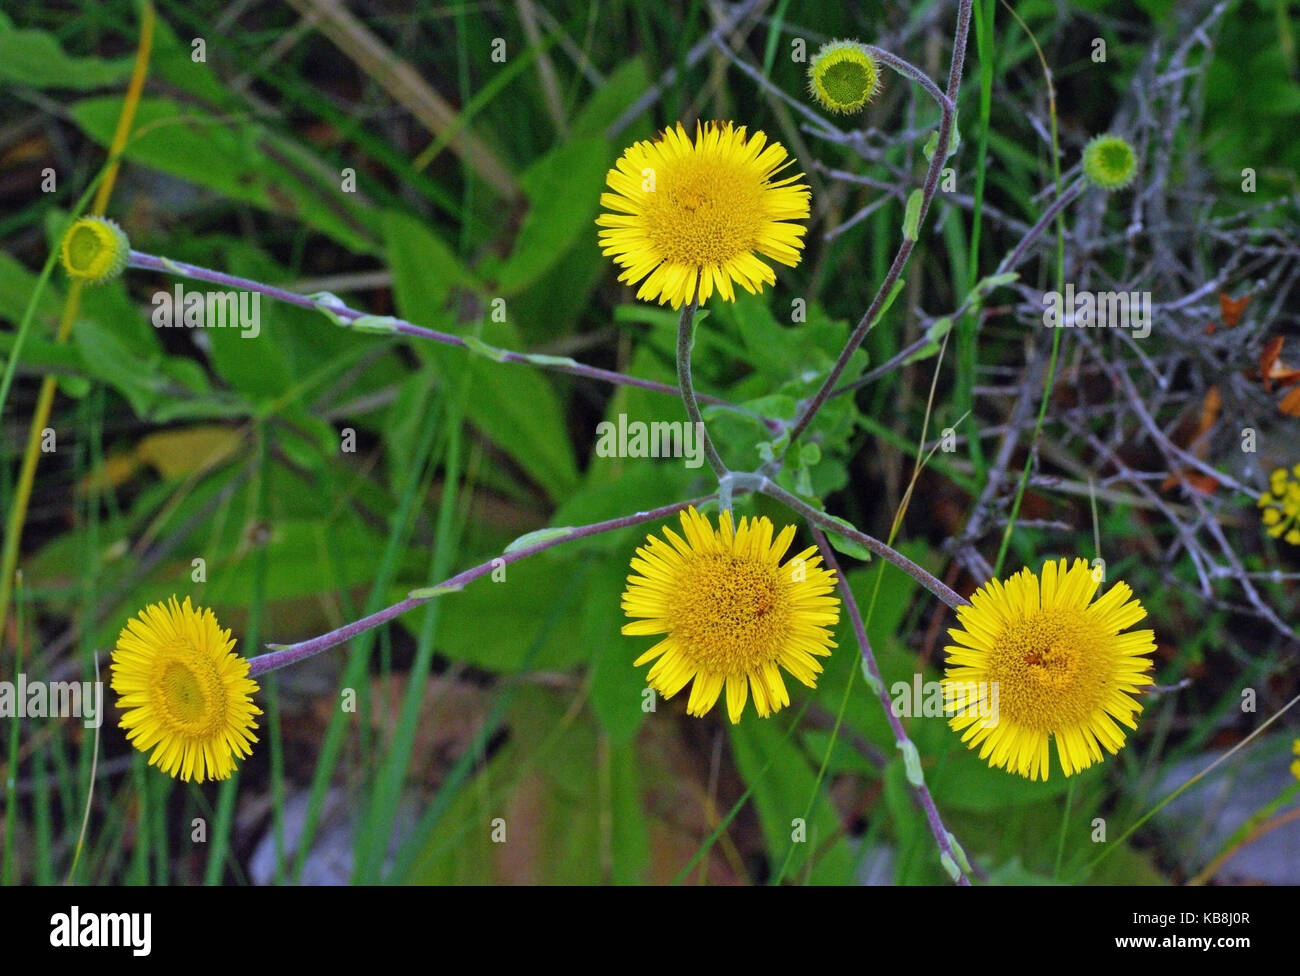 this is Pulicaria dysenterica, the Common fleabane or Medow fals fleabane, from the family Asteraceae (Compositae) Stock Photo